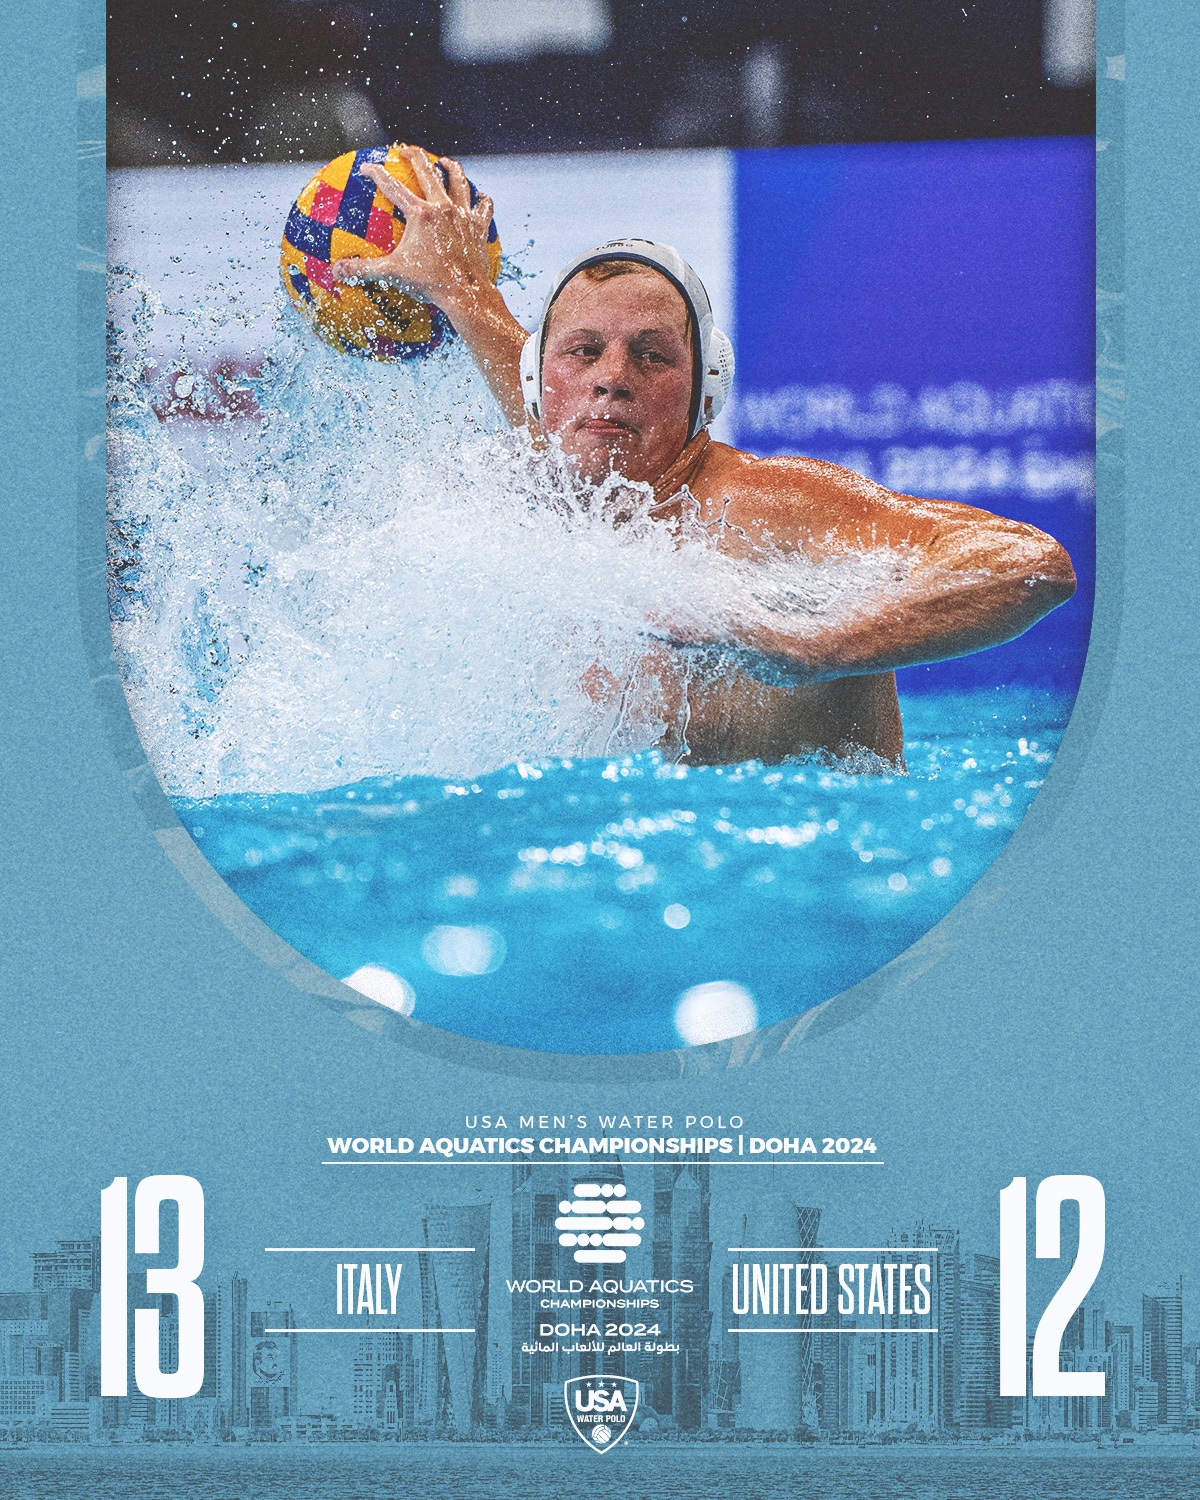 USA Water Polo on X: Team USA lost to Italy 13-12 in the